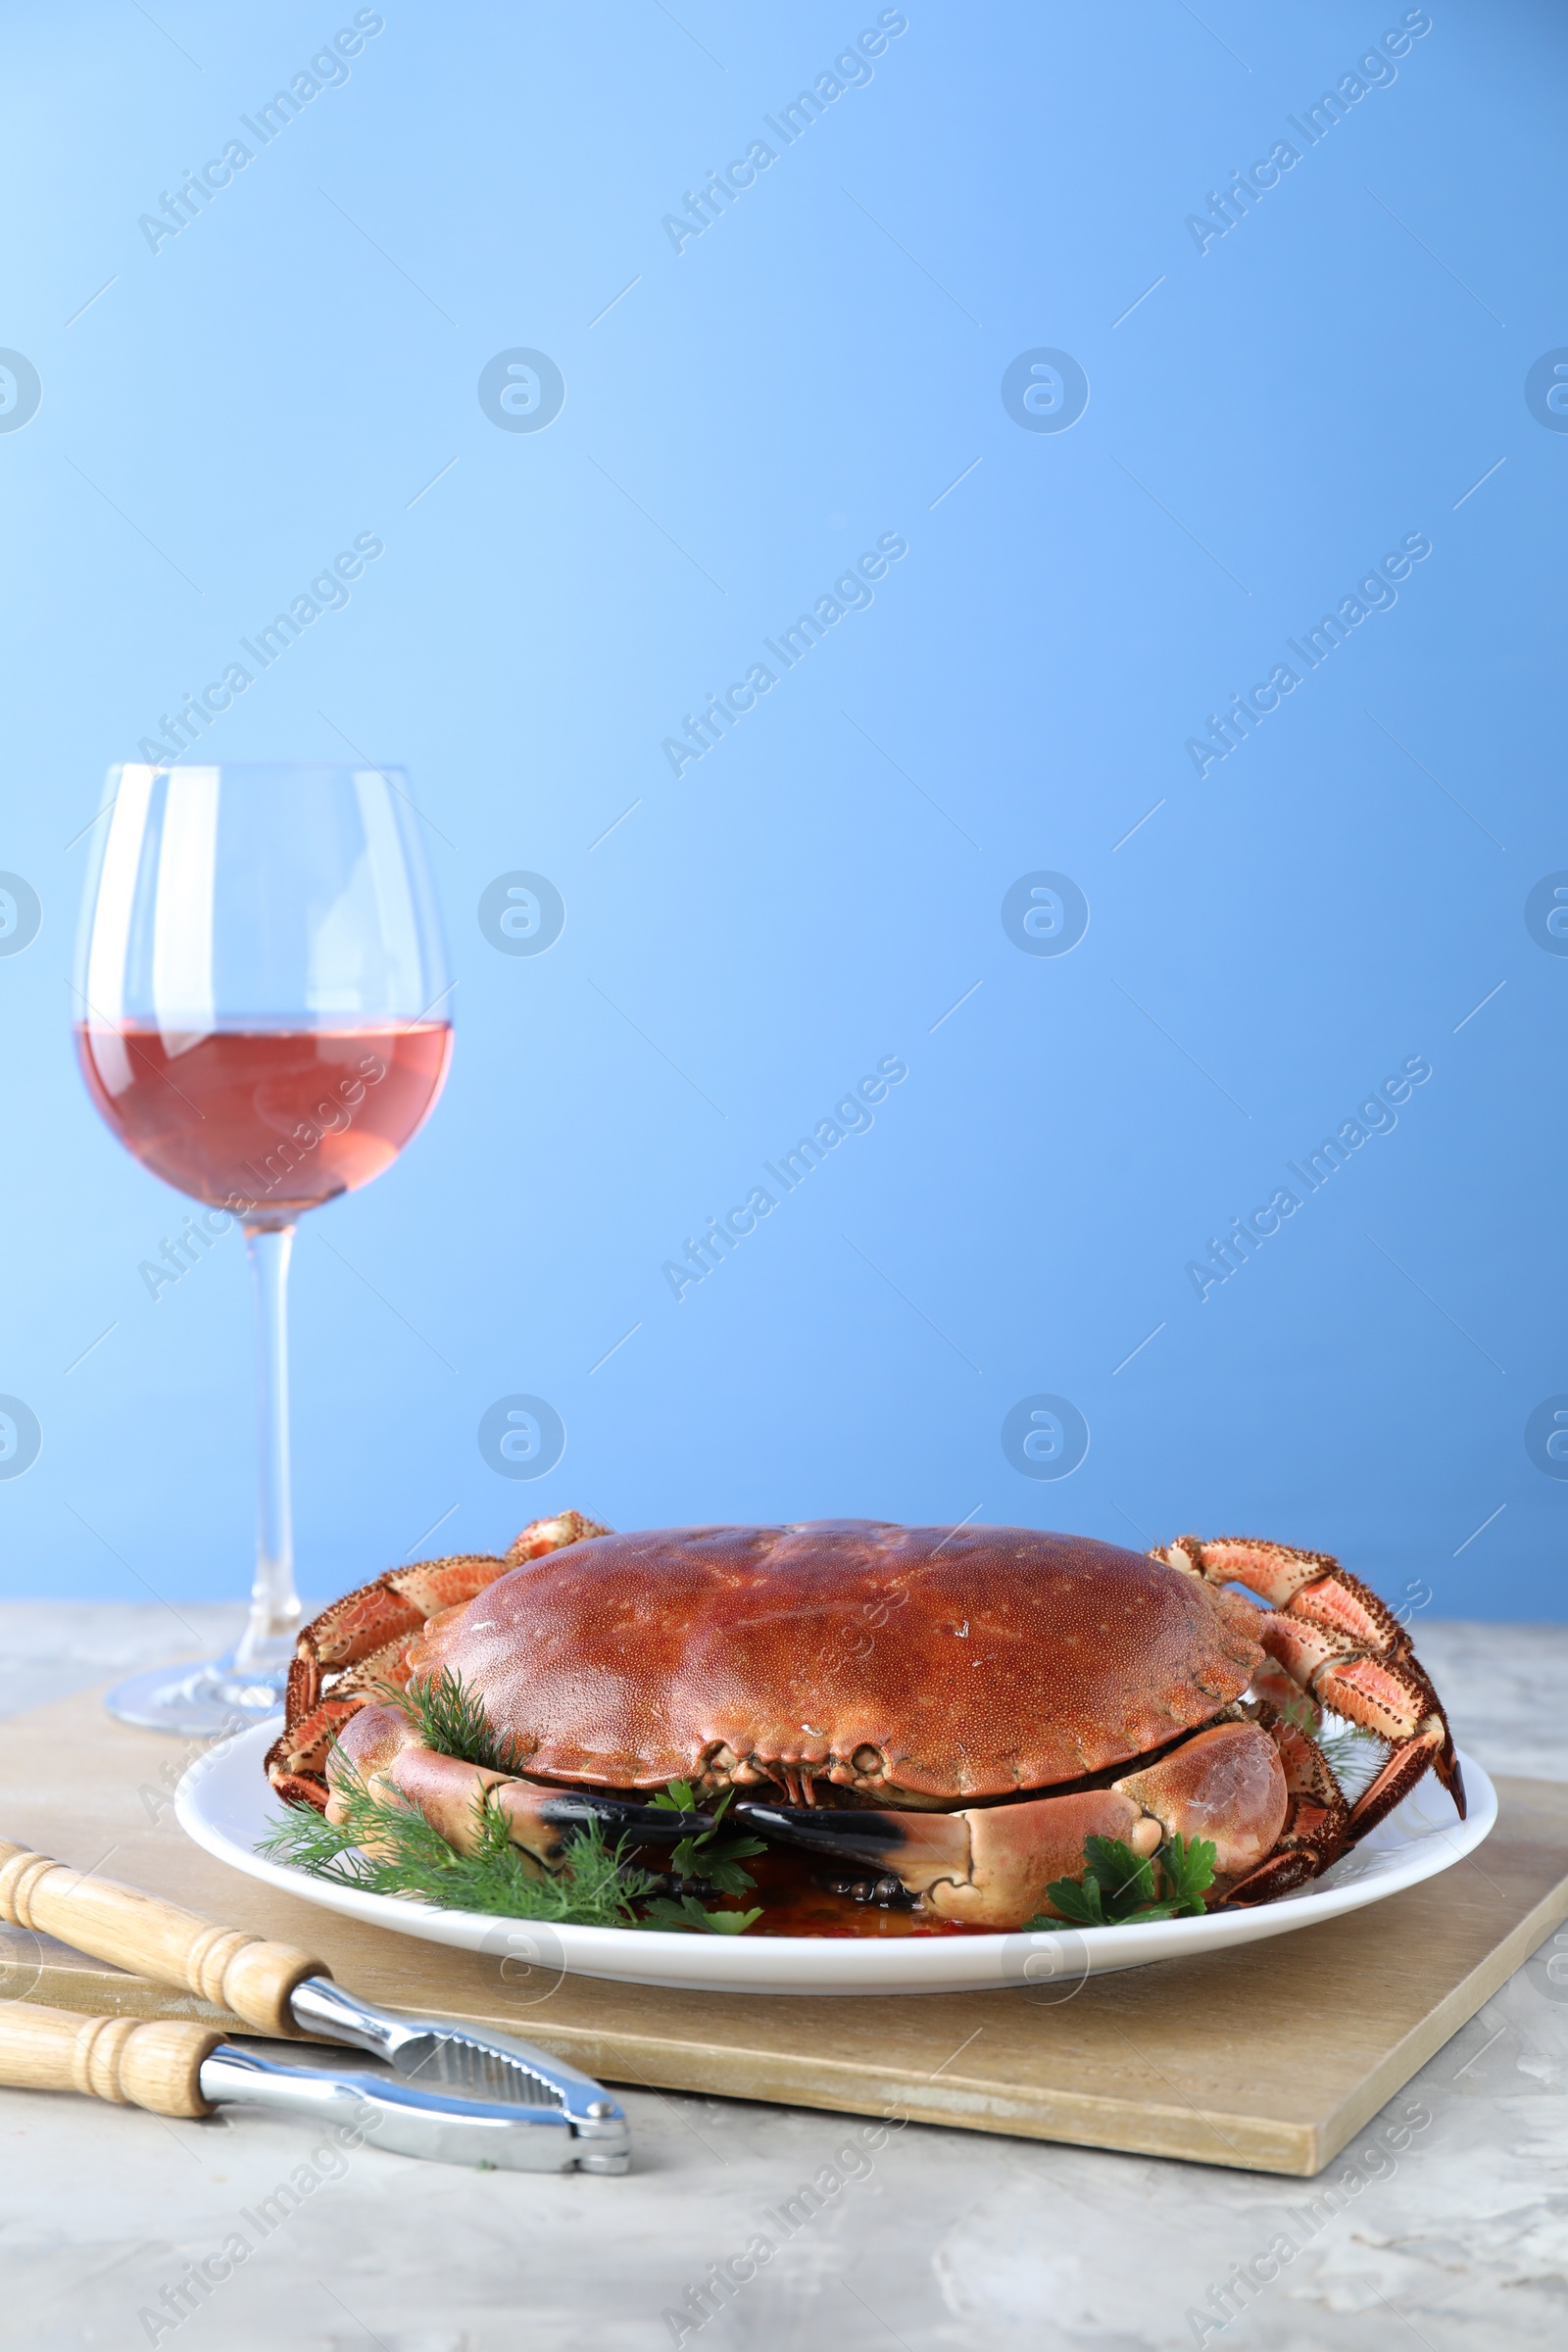 Photo of Delicious crab served with greens and wine on table against light blue background. Space for text